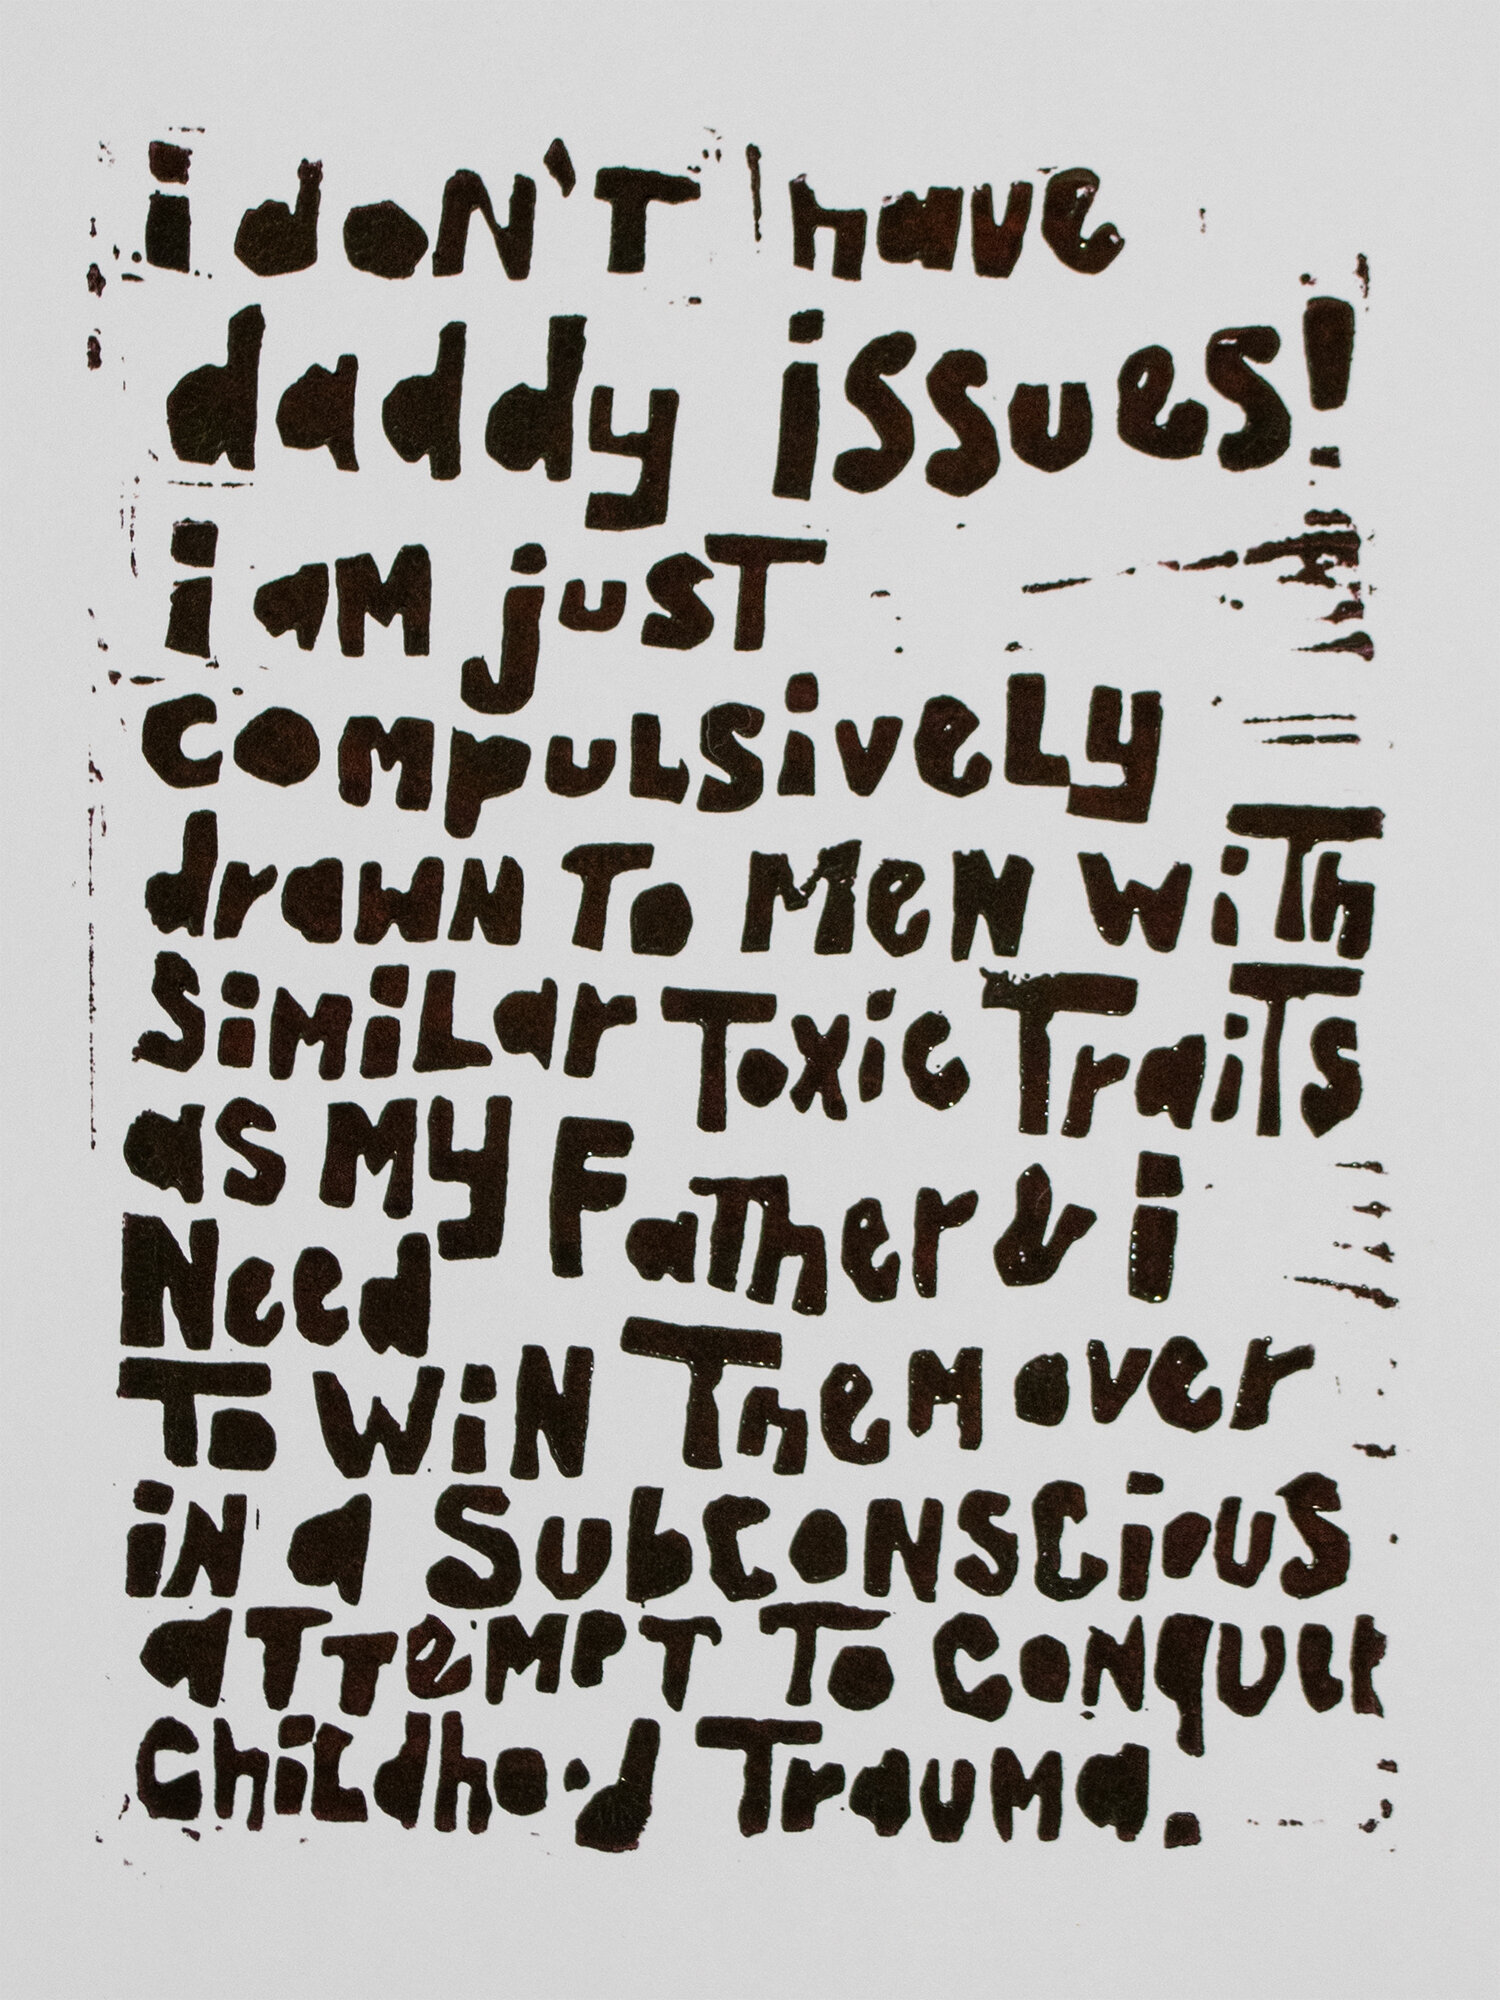 fyi, "daddy issues" is a short sighted and reductive assessment of individuals that are often processing and grappling with trauma.